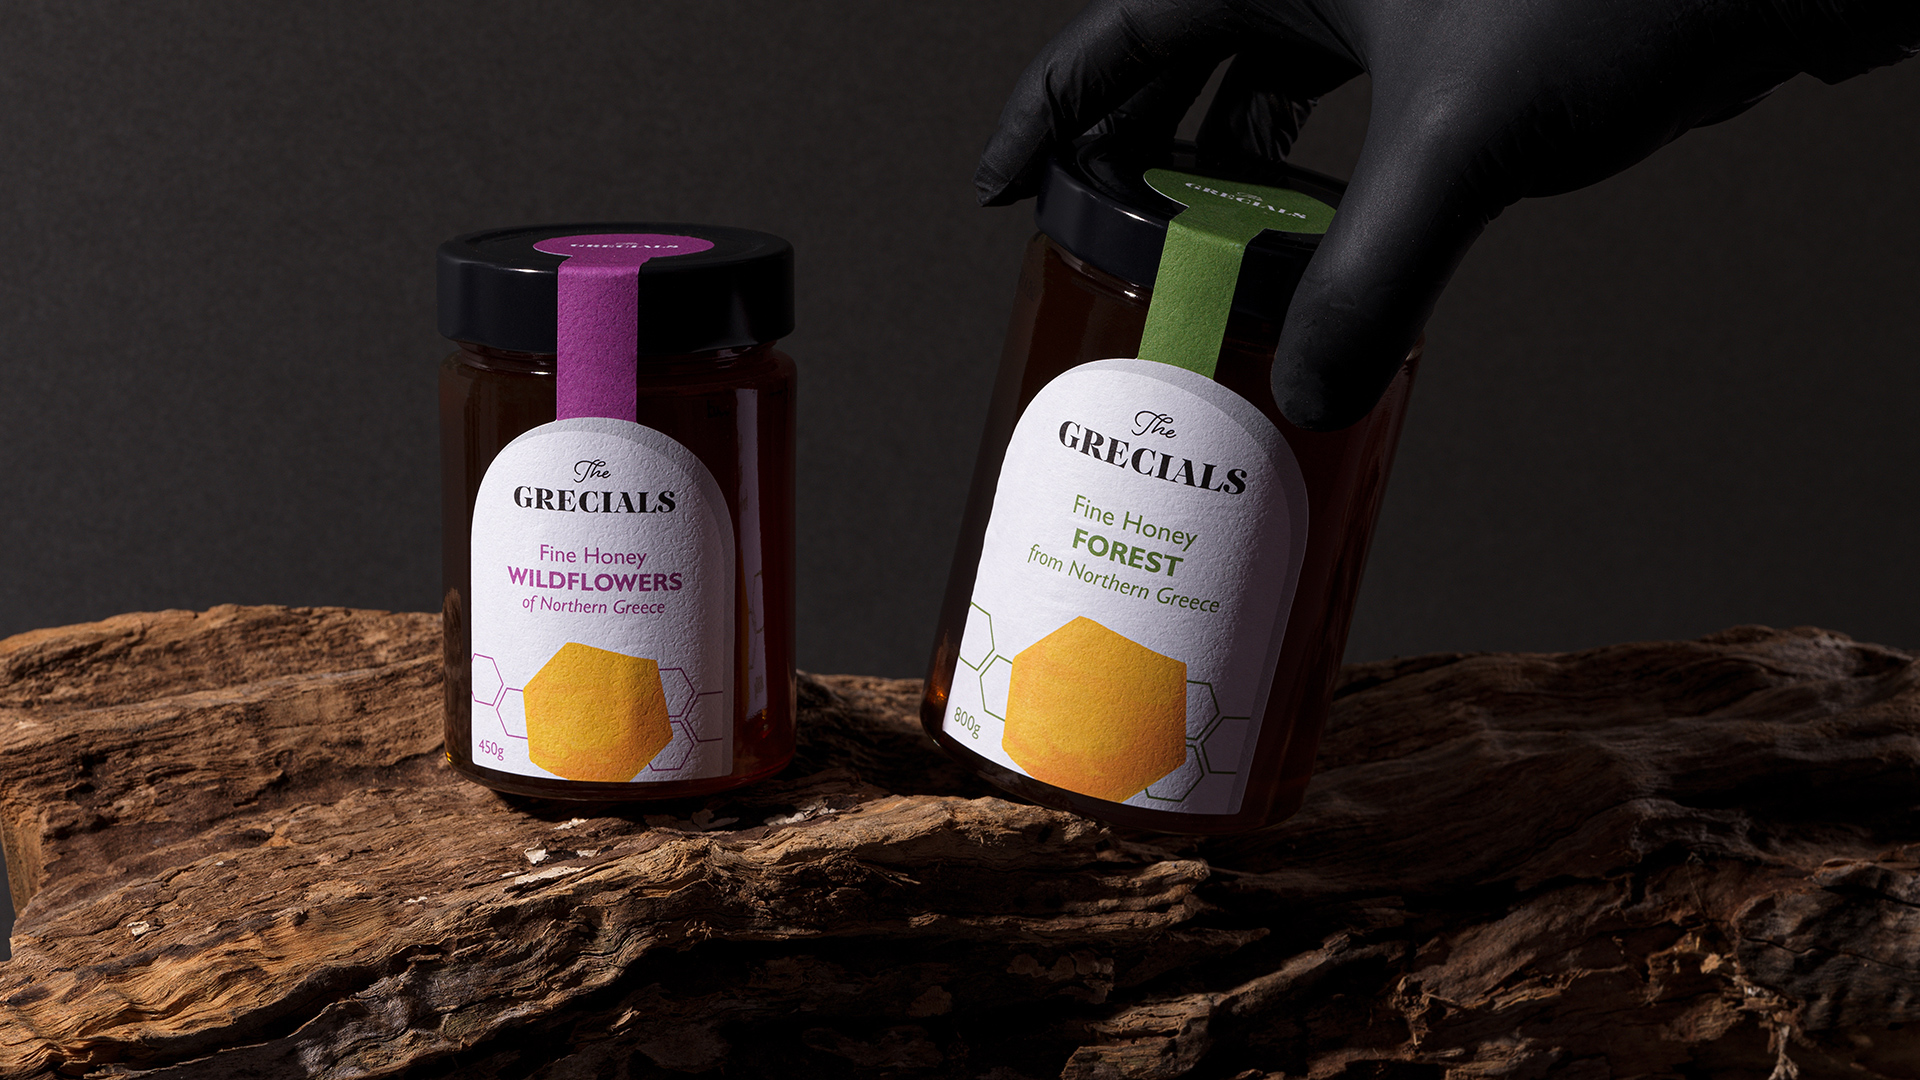 Branding And Packaging Of Grecials